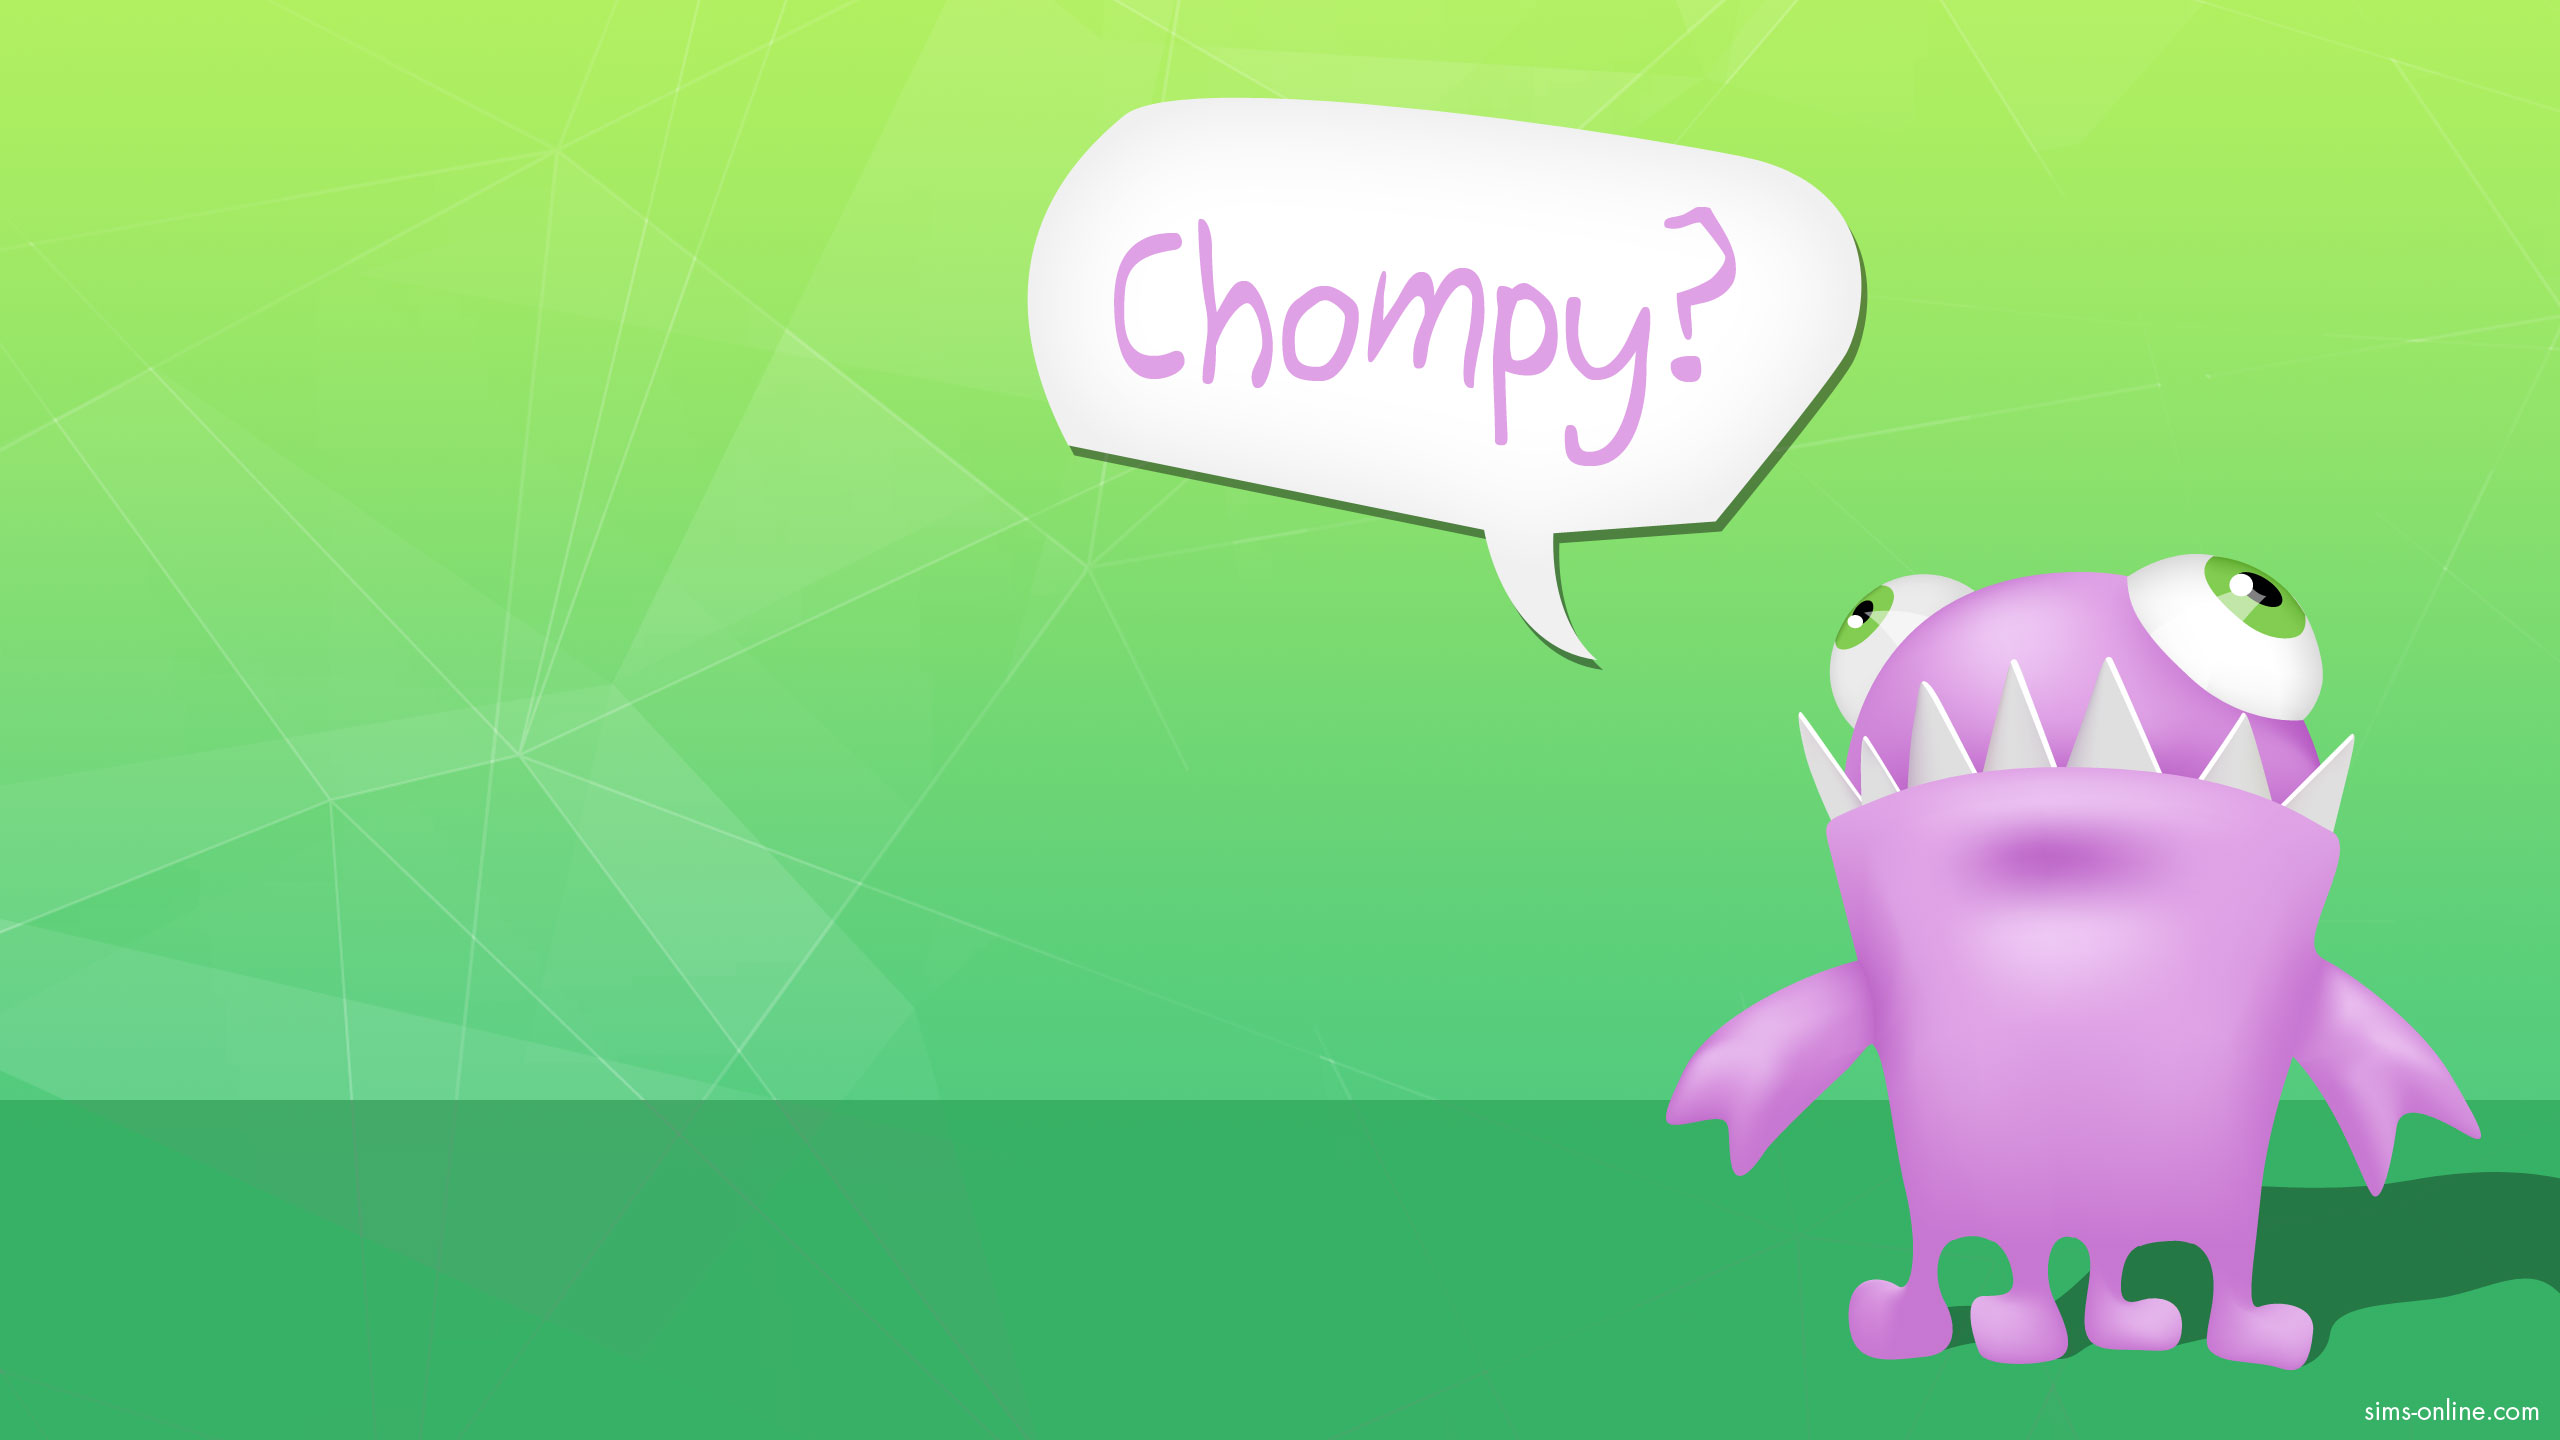 The Sims Wallpaper Chompy Pink